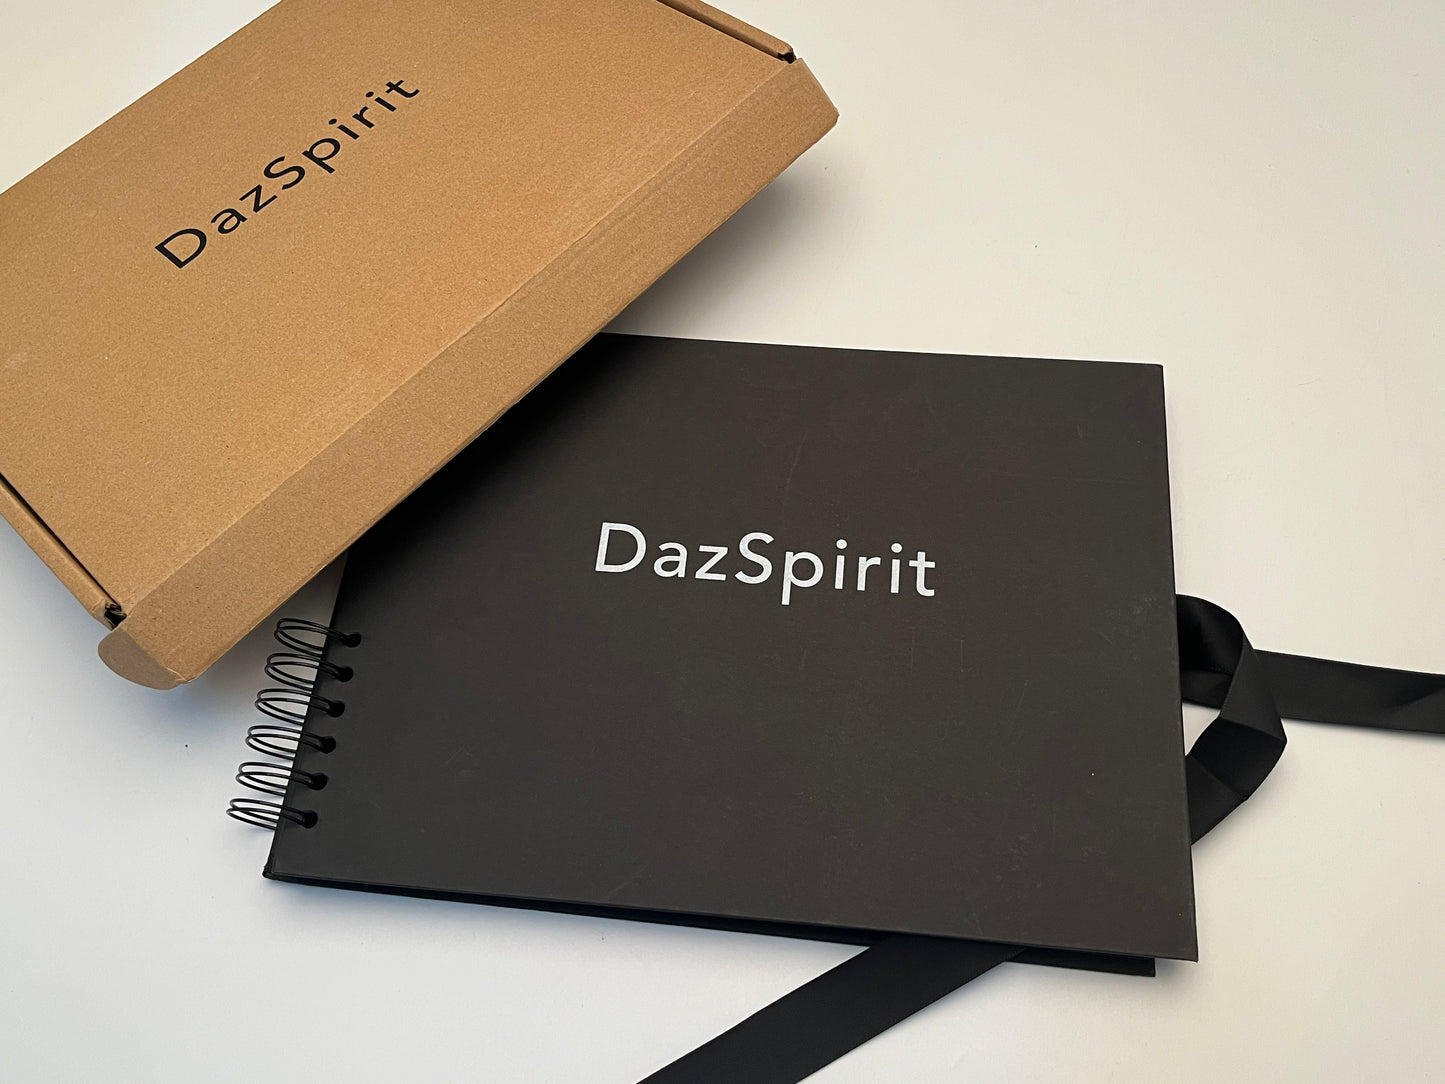 DazSpirit Customizable Scrapbook Photo Album with 12 Metallic Marker Pens, 80 Pages of Black Cardboard with Sturdy Hard Cover and Rust-Free Binding, Special Customizable Gift for Your Loved Ones